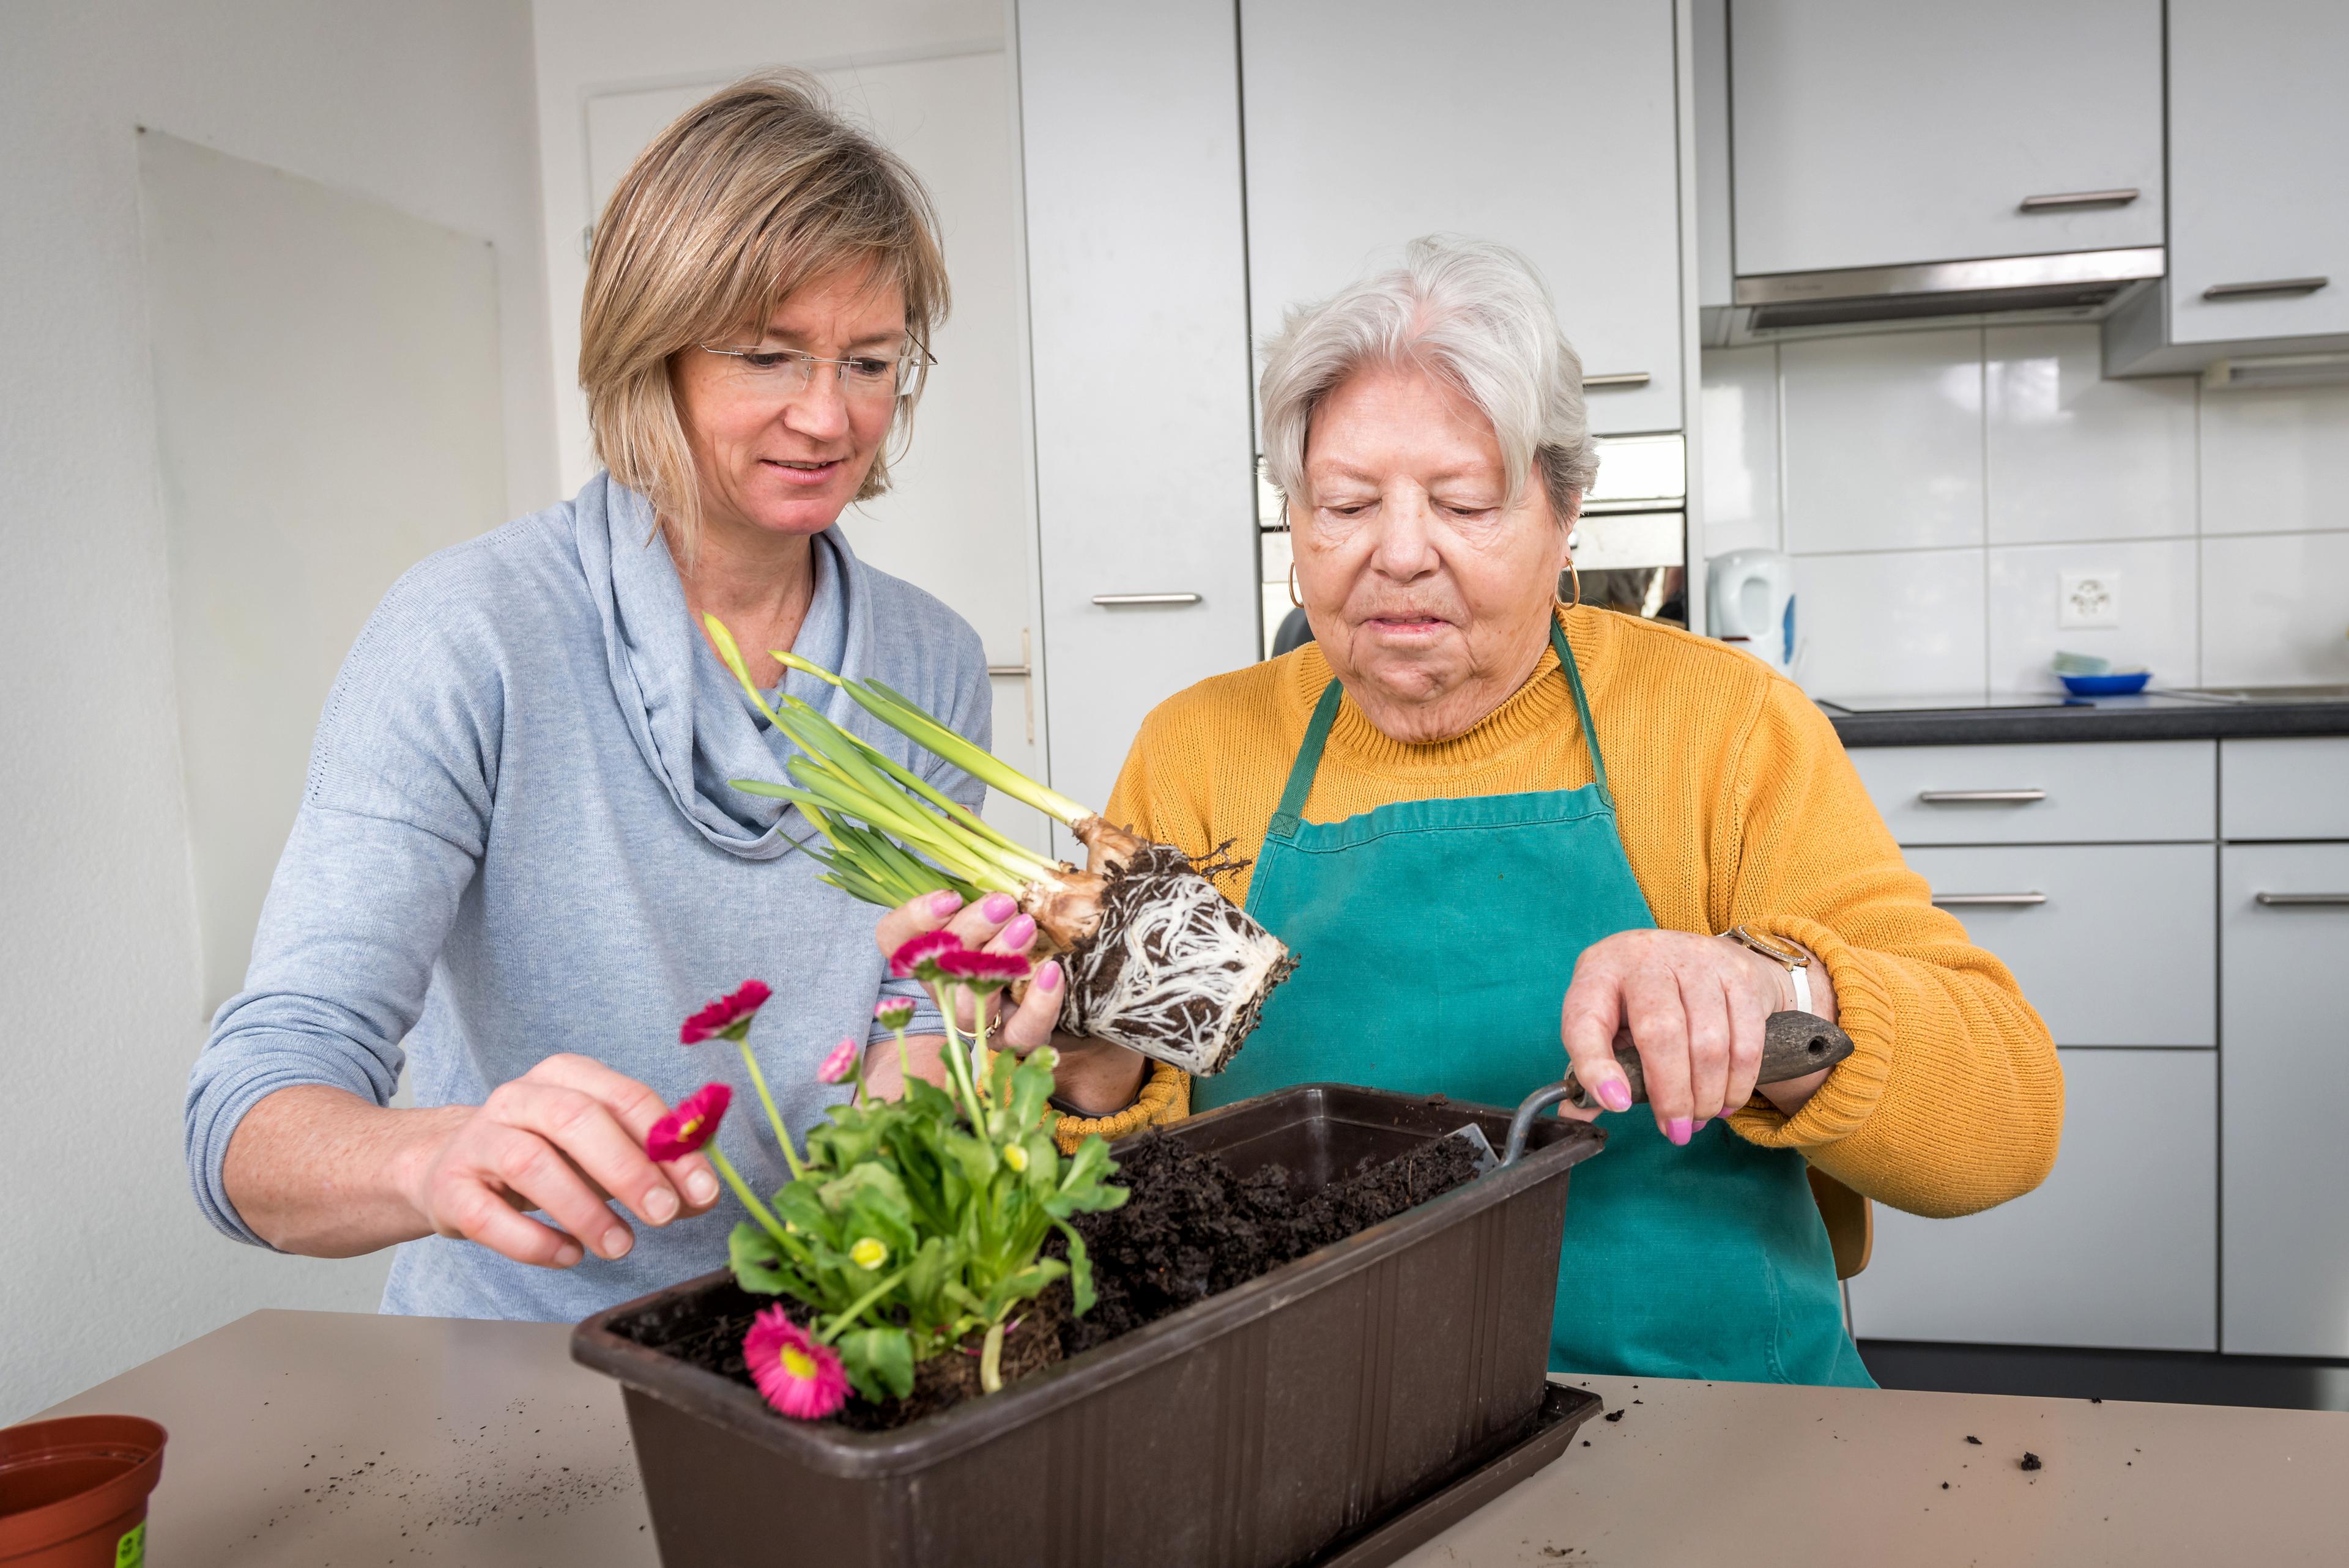 A patient puts flowers in a vase with the help of a therapist.